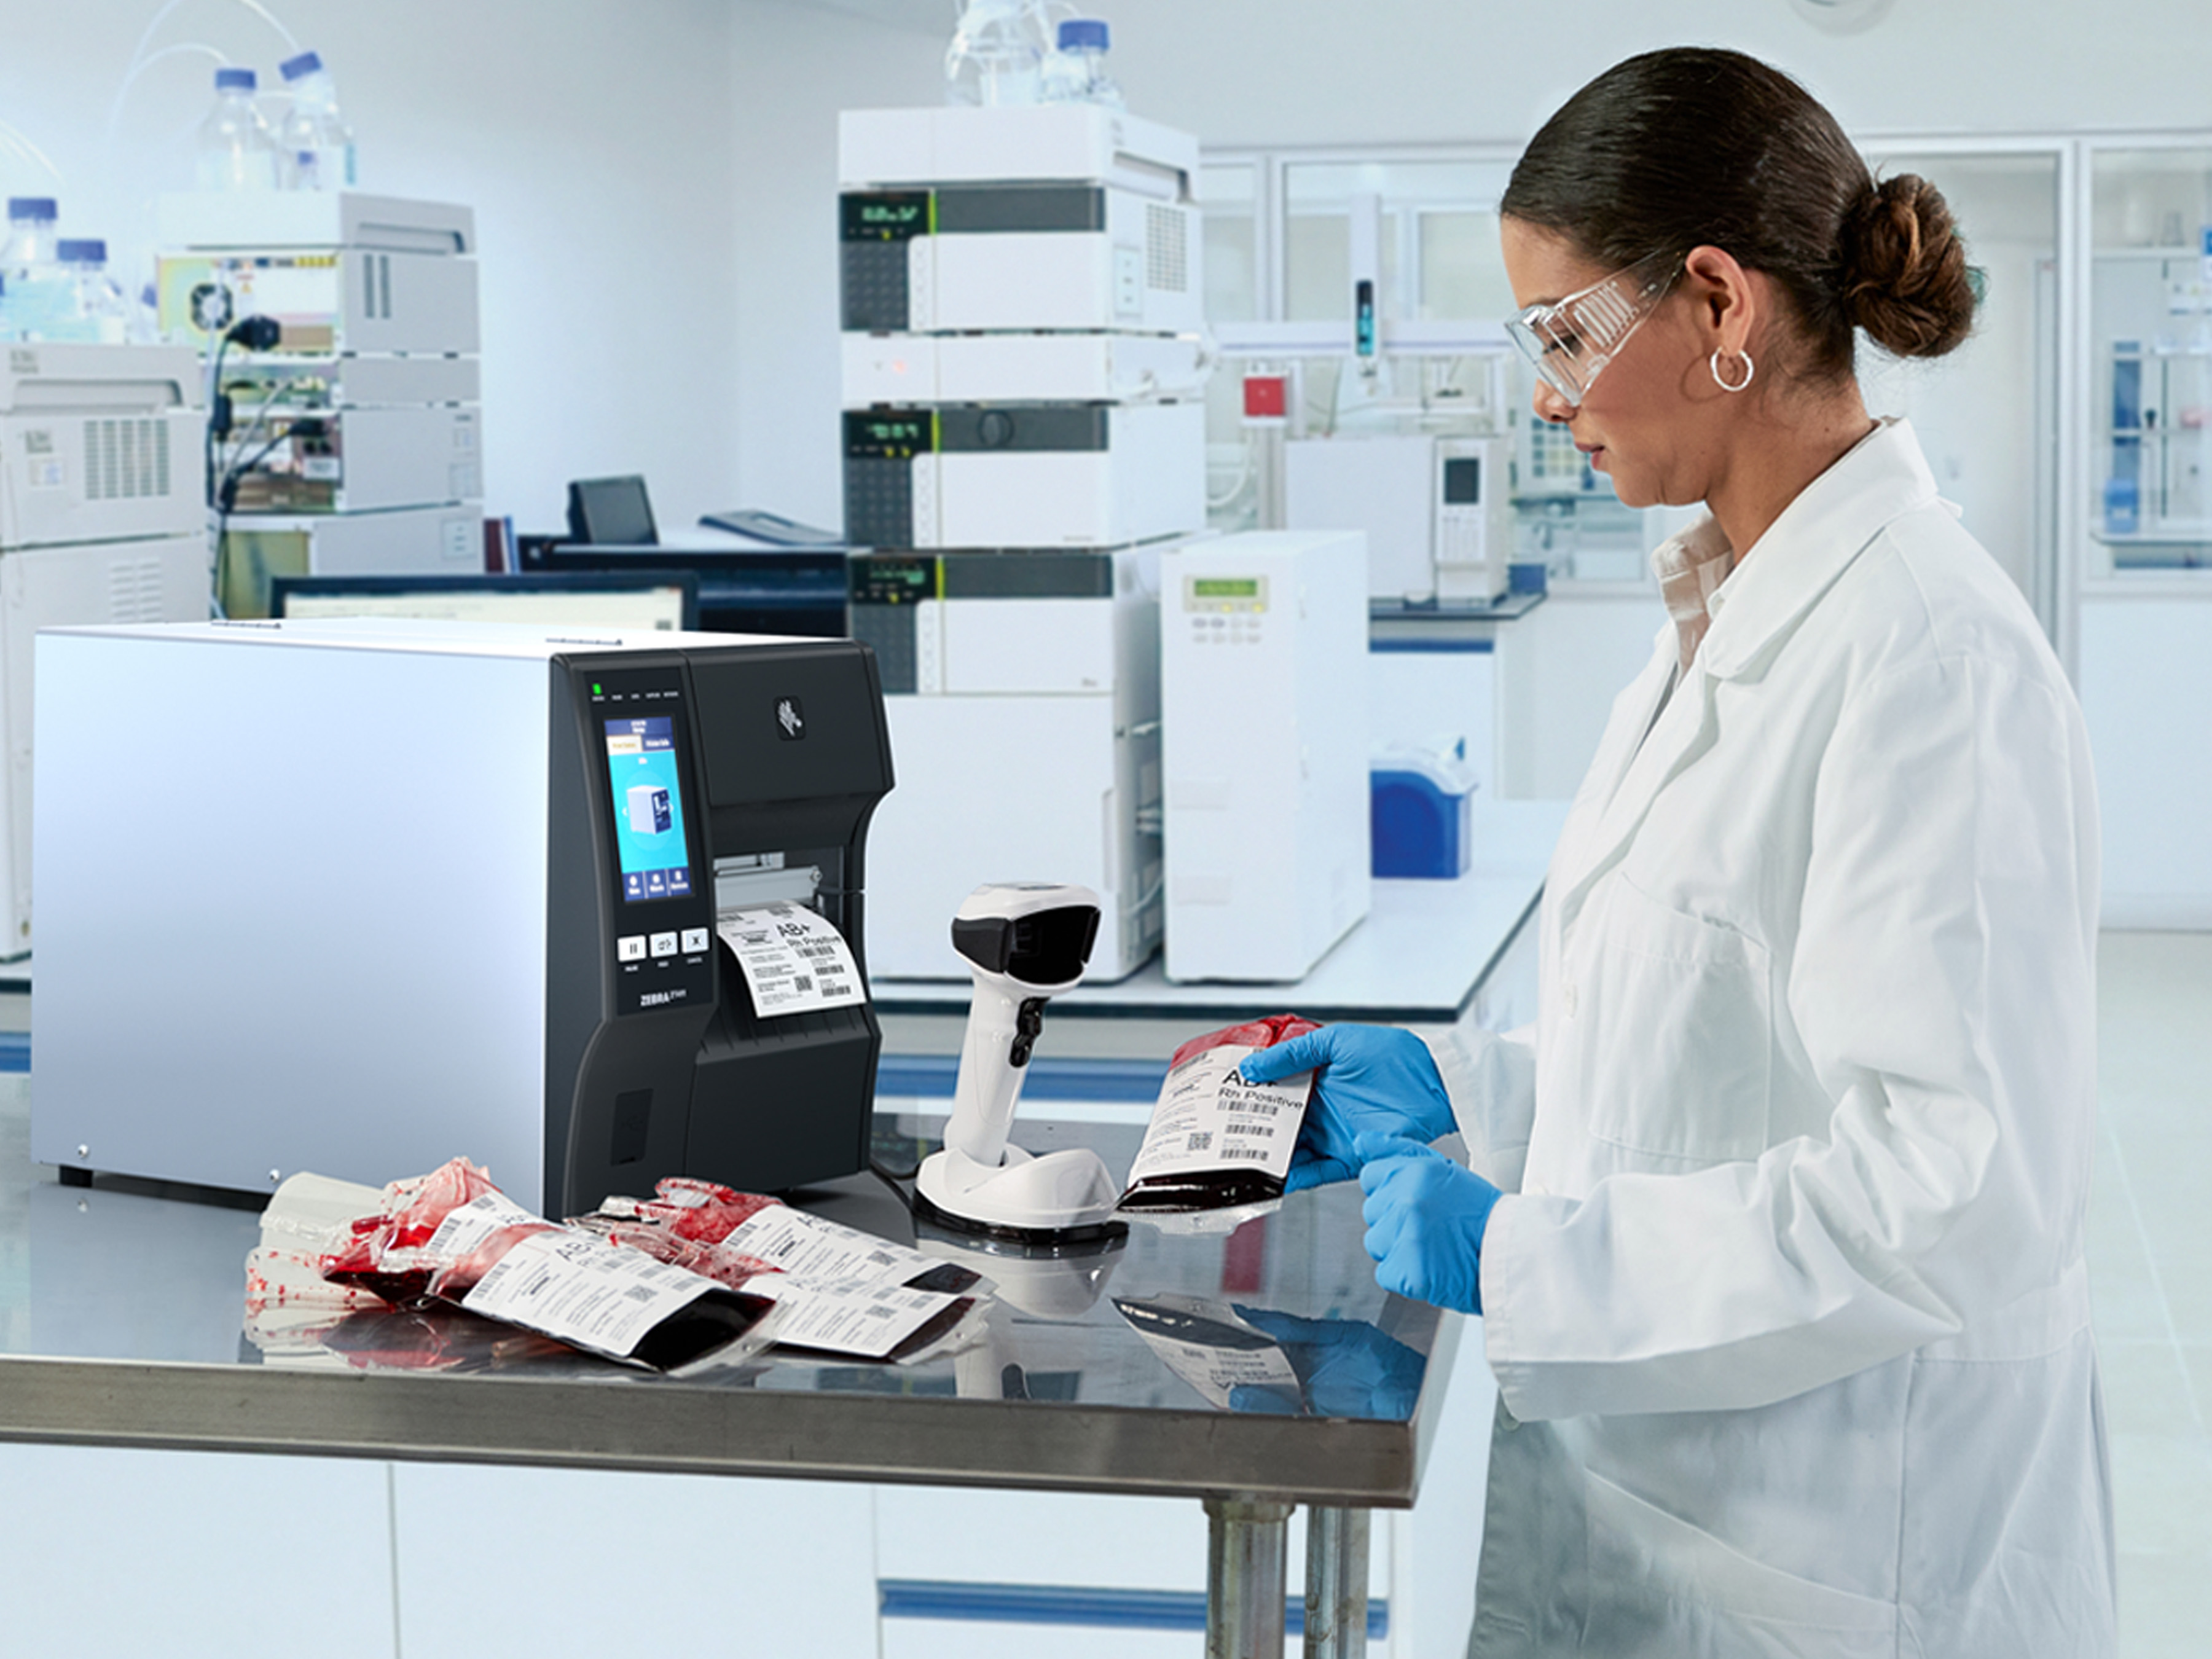 A healthcare professional is in a laboratory, holding a bag of blood to check the information on the label. She is standing next to a label printer and a handheld scanner.